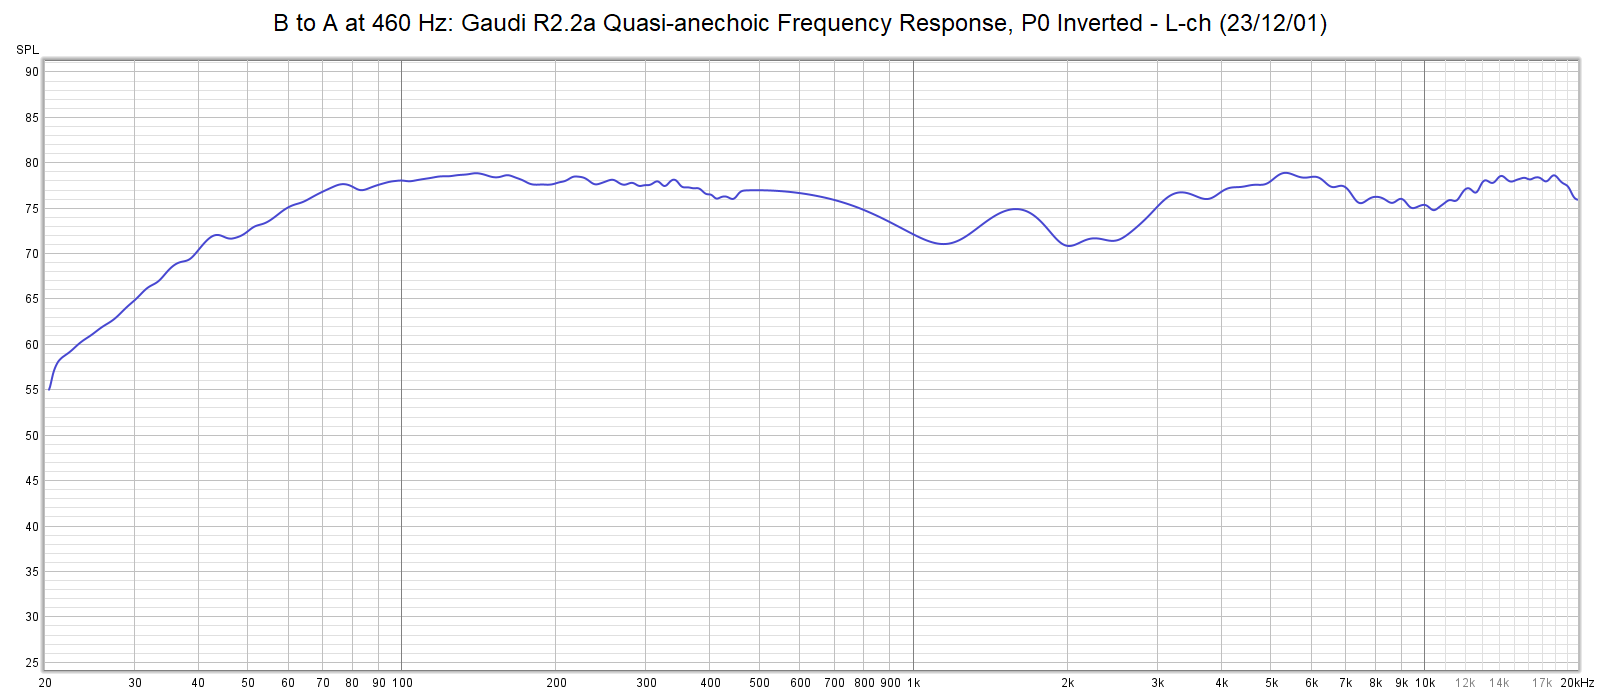 Quasi-anechoic frequency response of Gaudi R2.2, P0 inverted